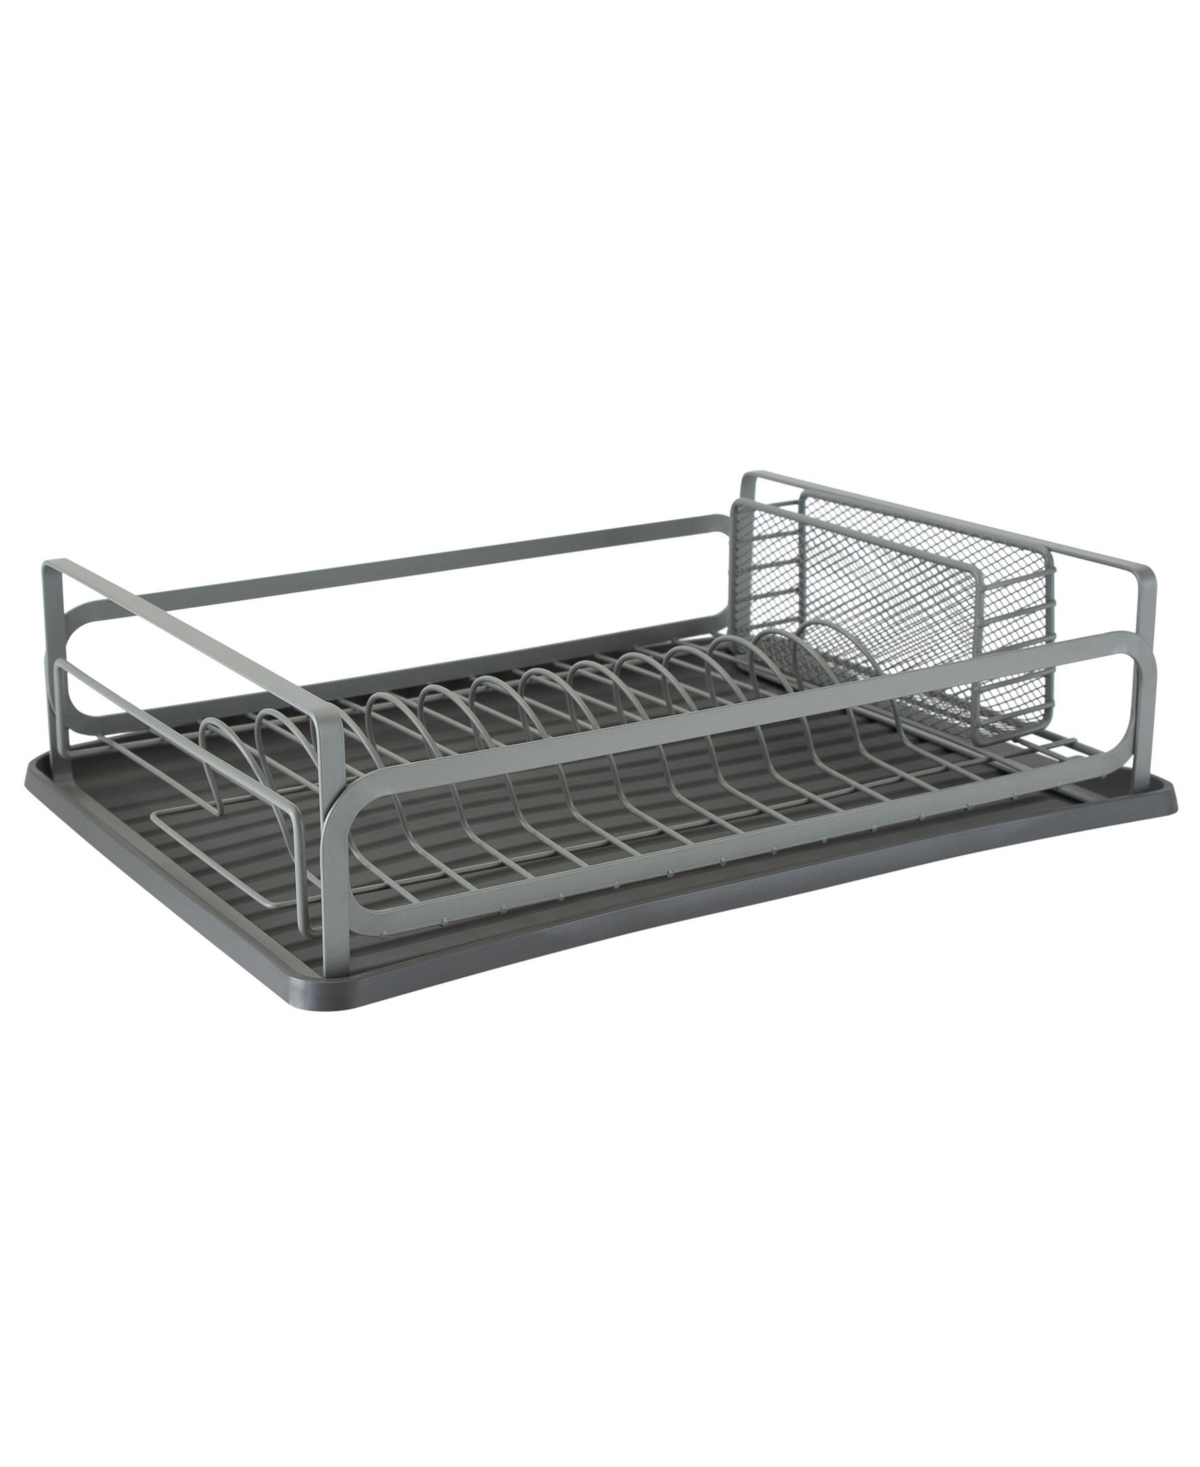 Large Industrial Collection Dish Rack - Gray